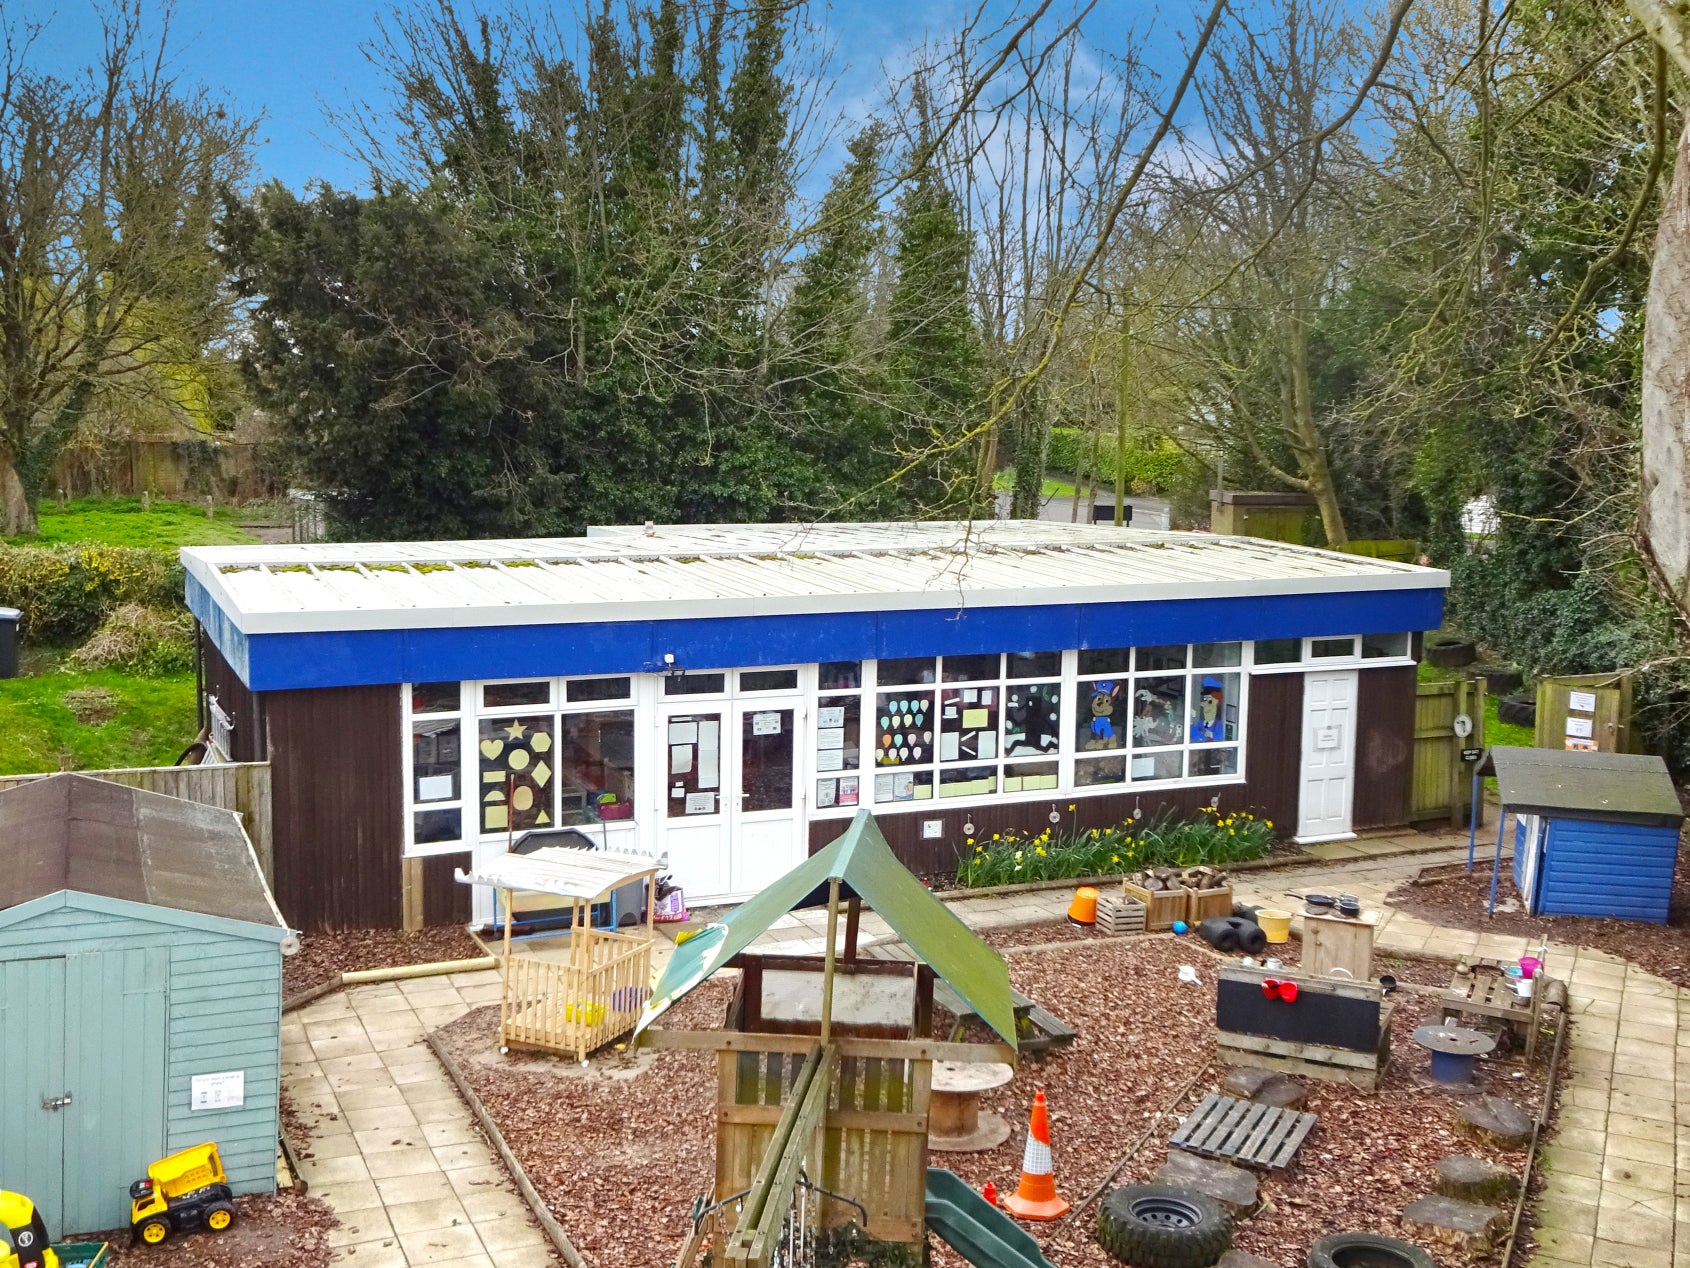 South Wonston Day Nursery in Hampshire